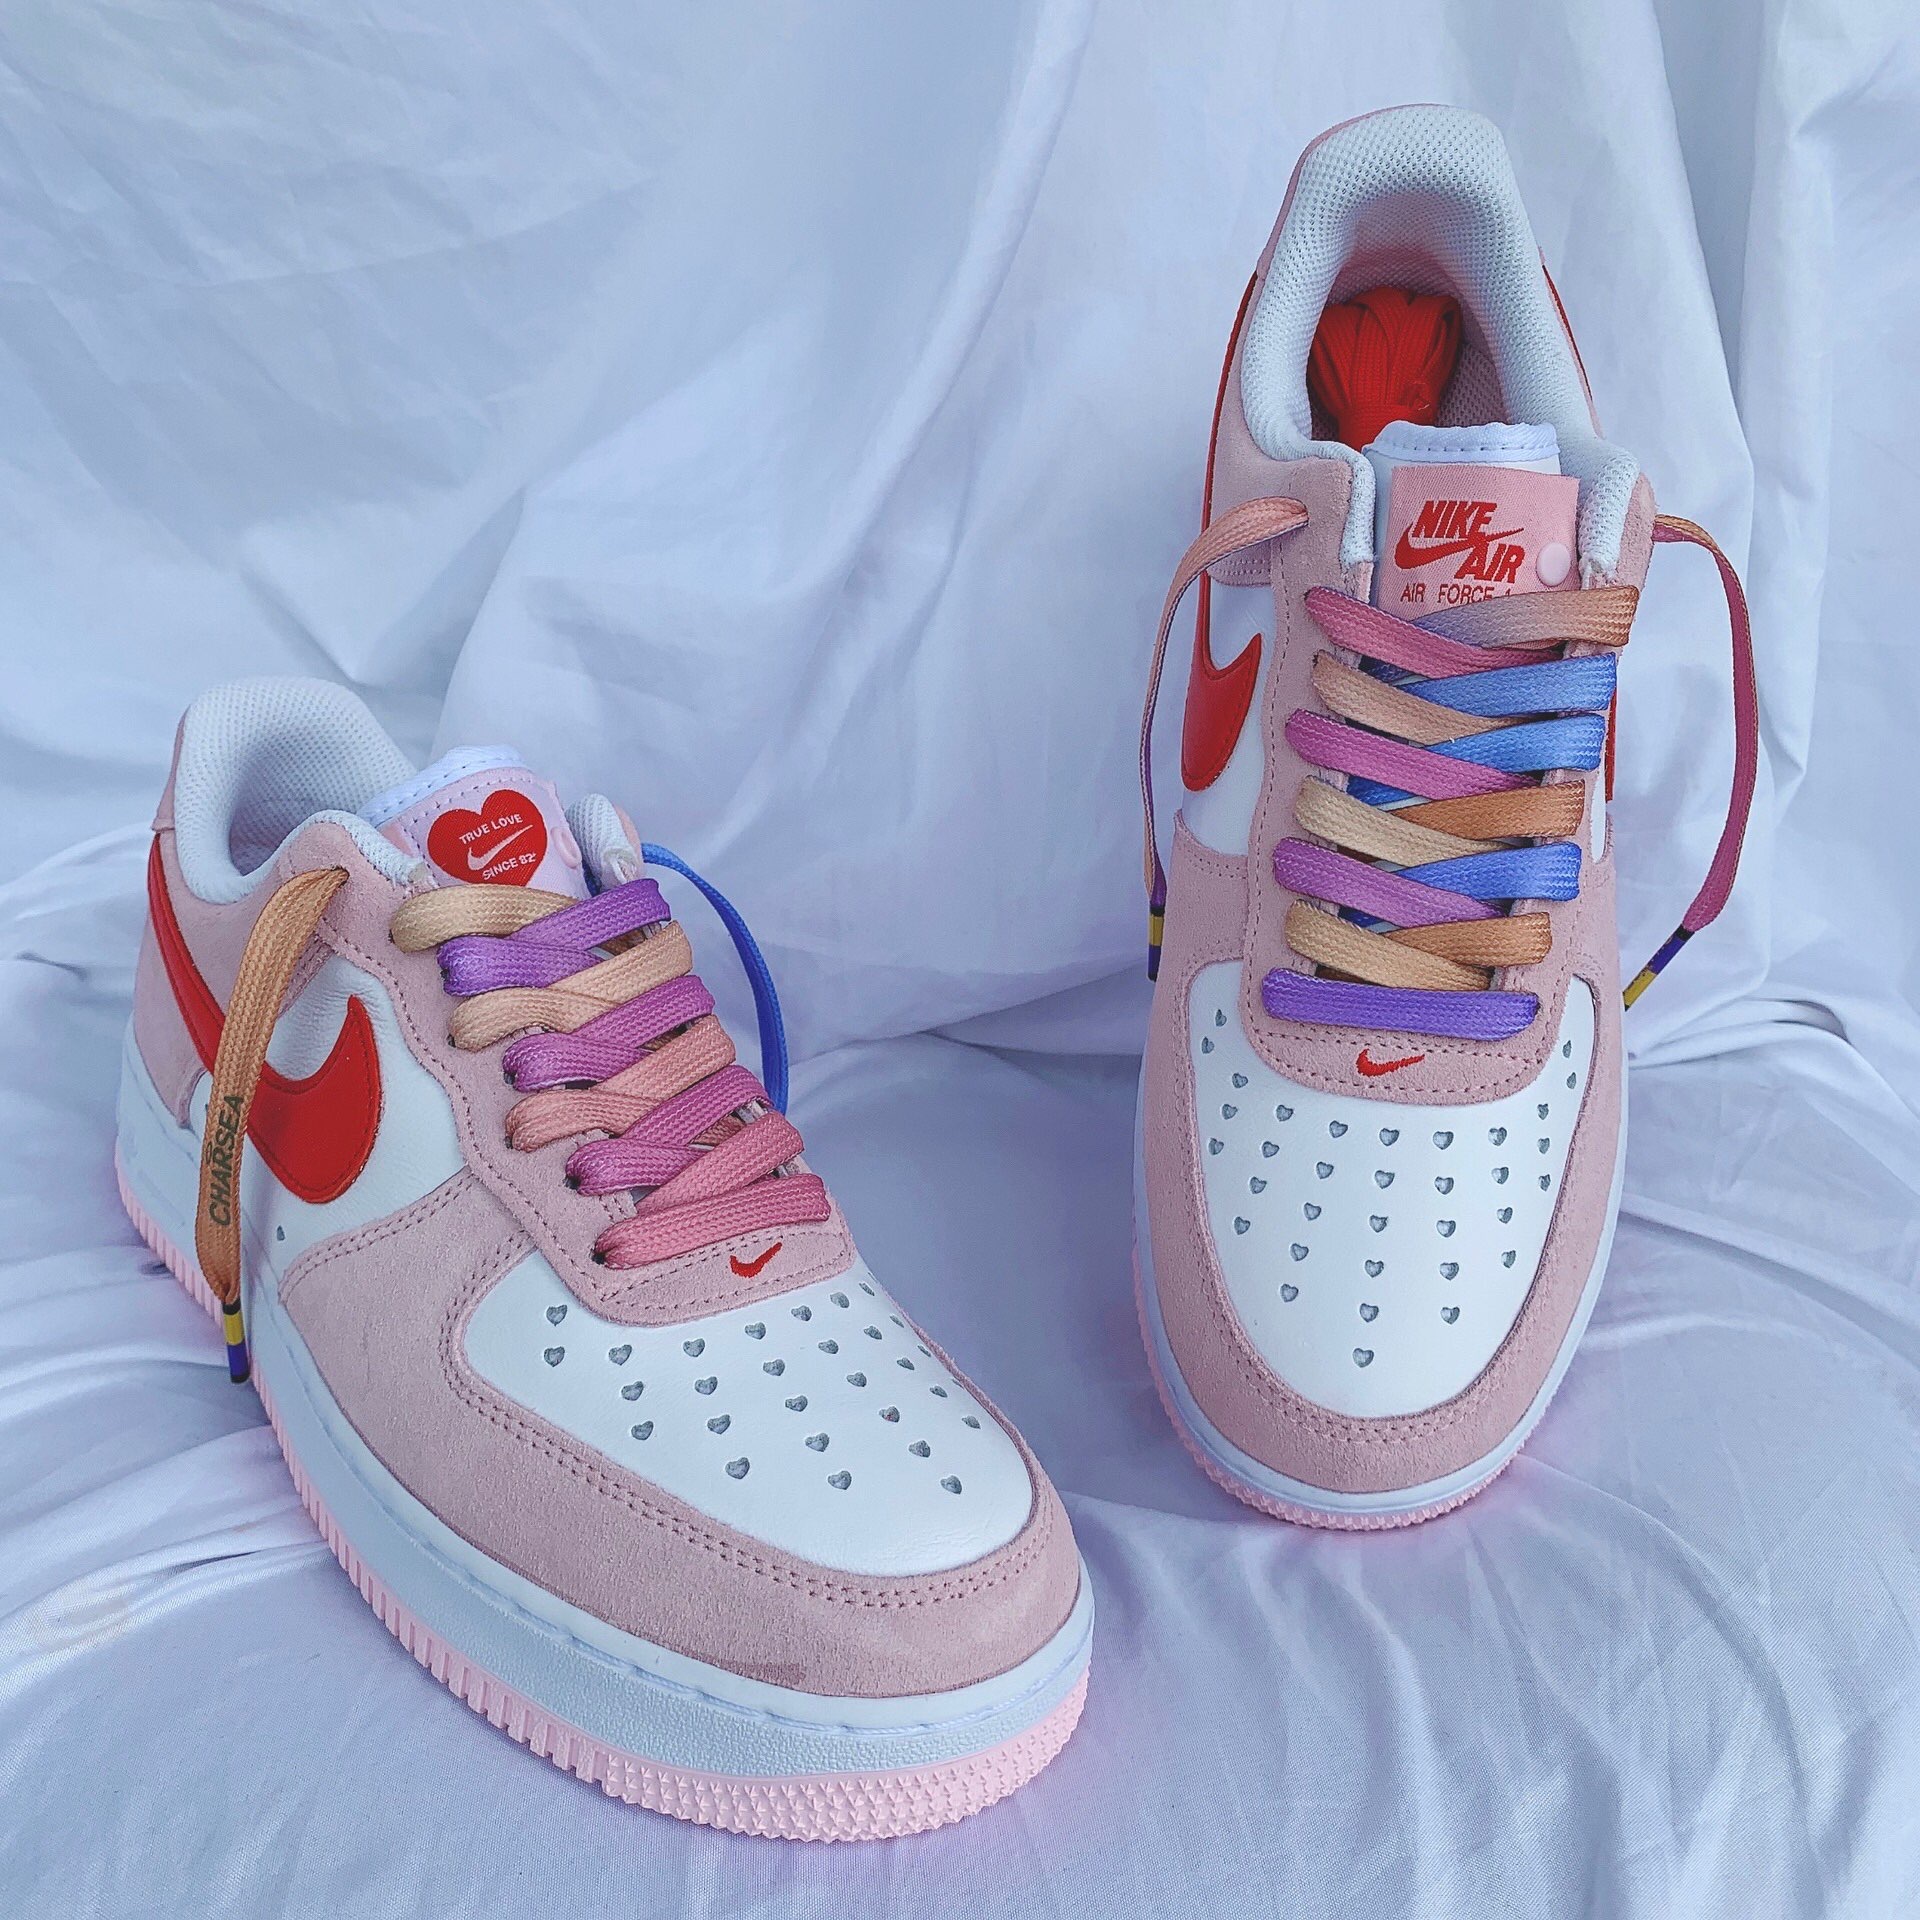 Nike Air Force 1 “Love Letter” Tulip Pink/White/University Red For Sale ...